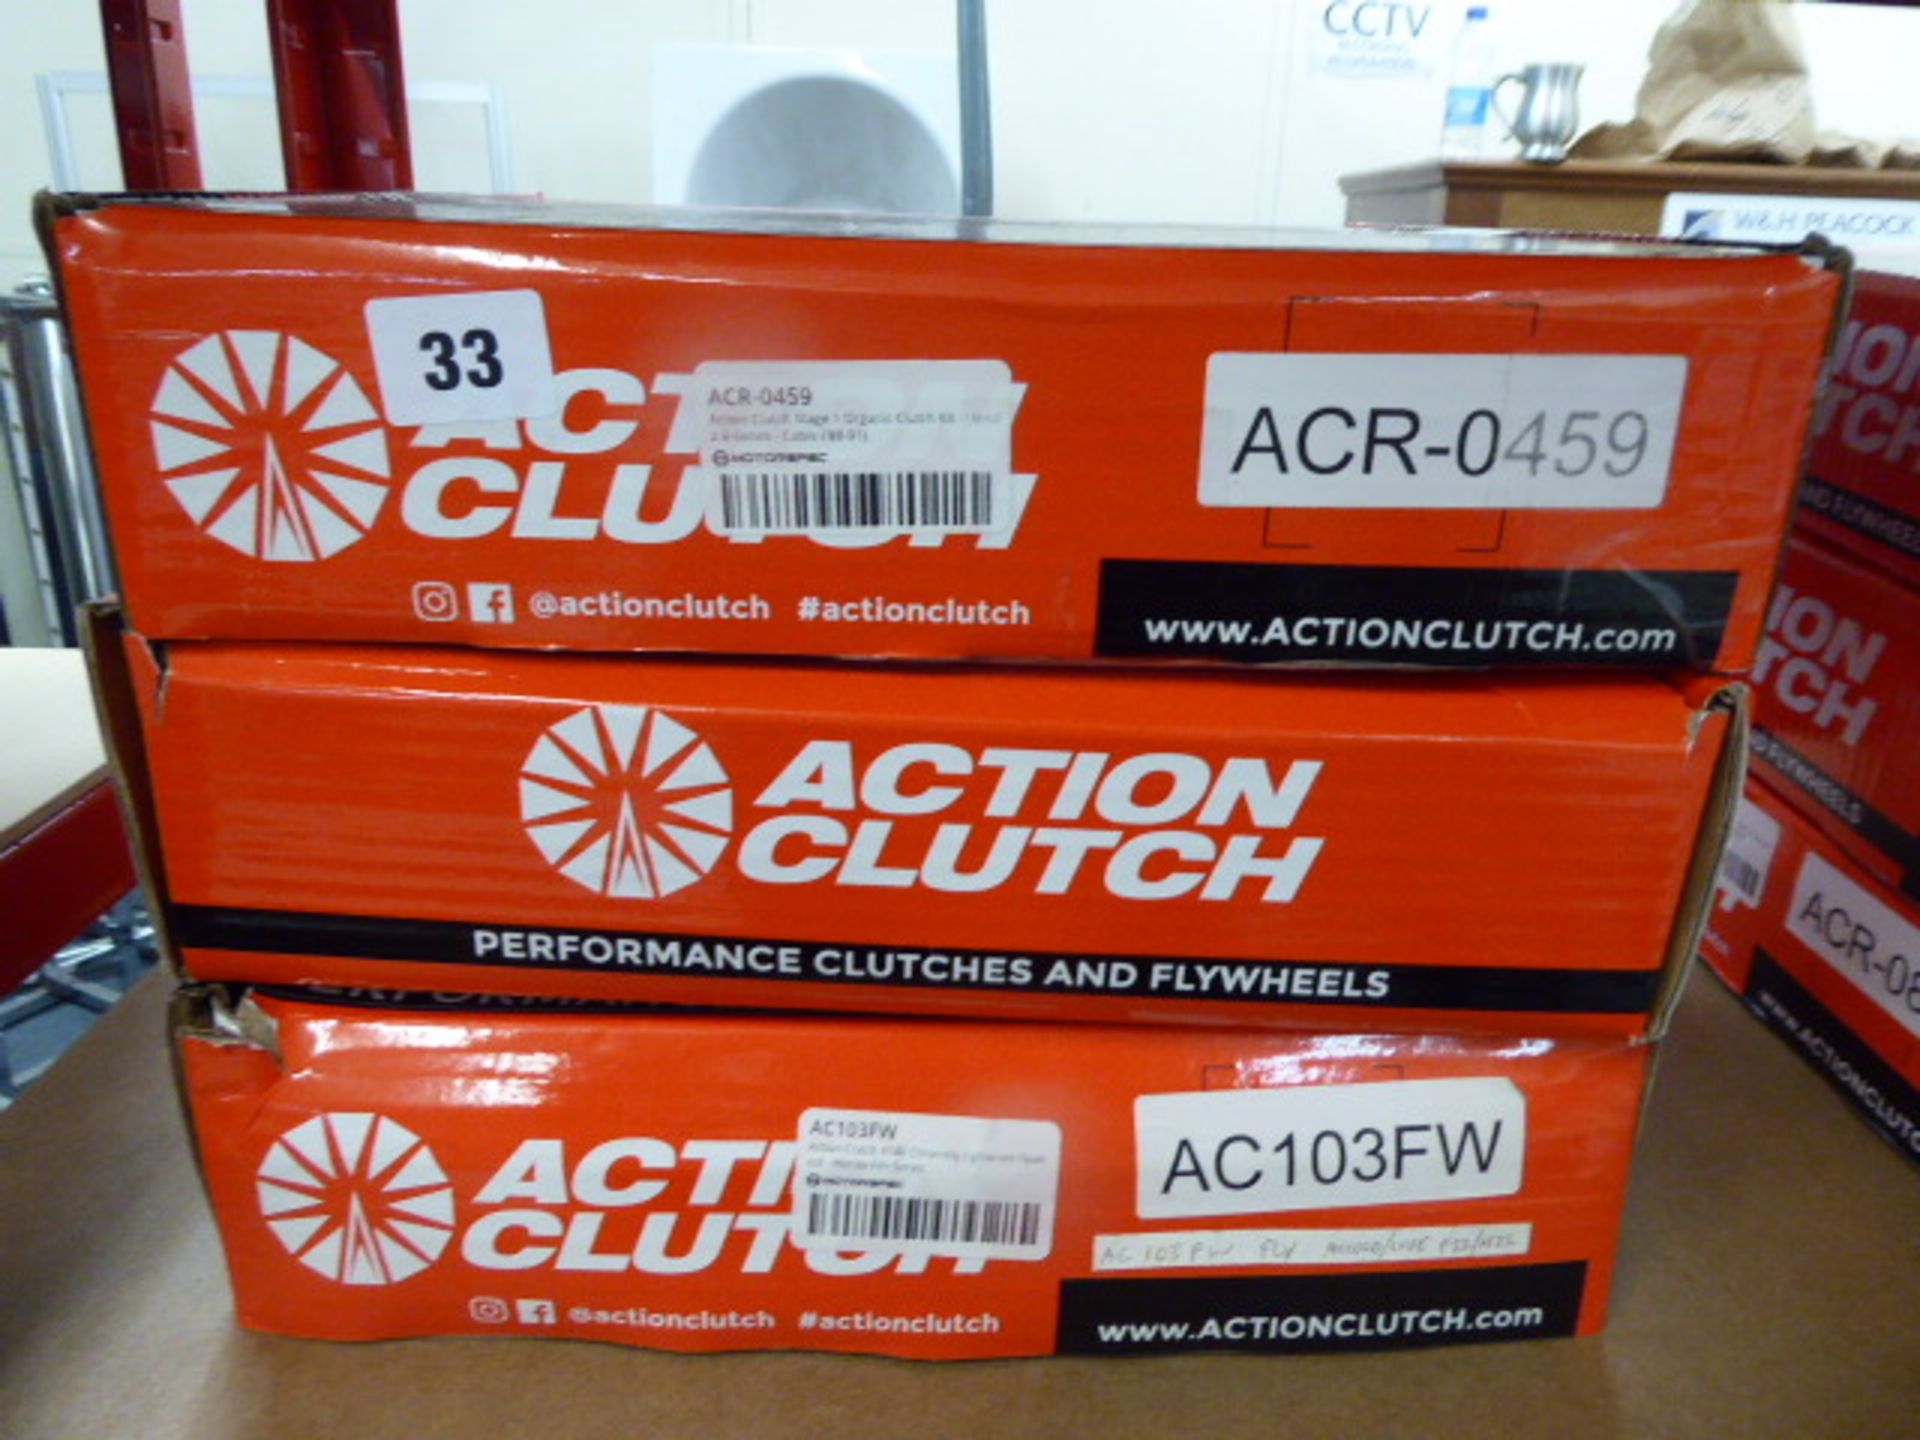 Three assorted Action Clutch fly wheels and clutch kits